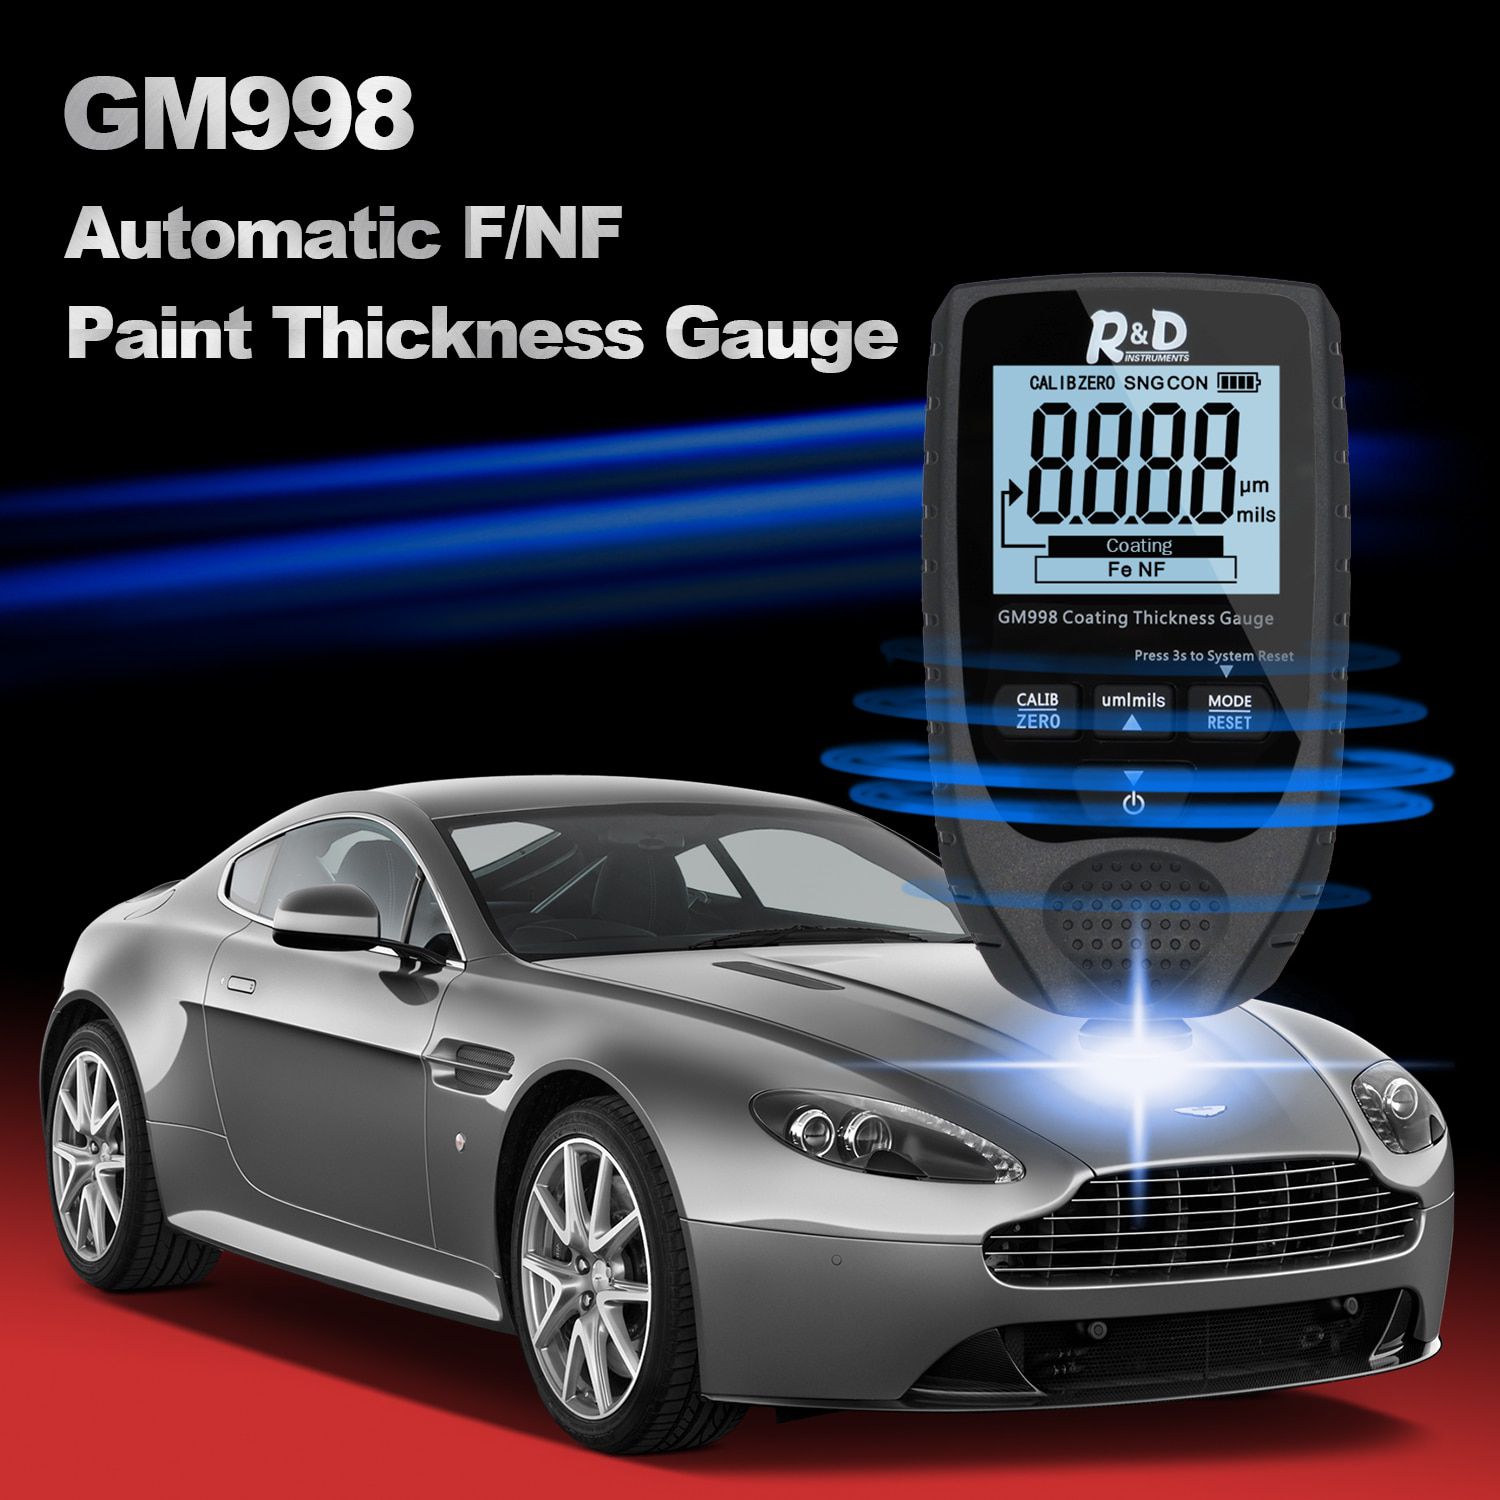 NEW Full Black GM998 Car Paint Coating Thickness Gauge electroplate metal coating thickness tester meter 0-1500um Fe & NFe probe